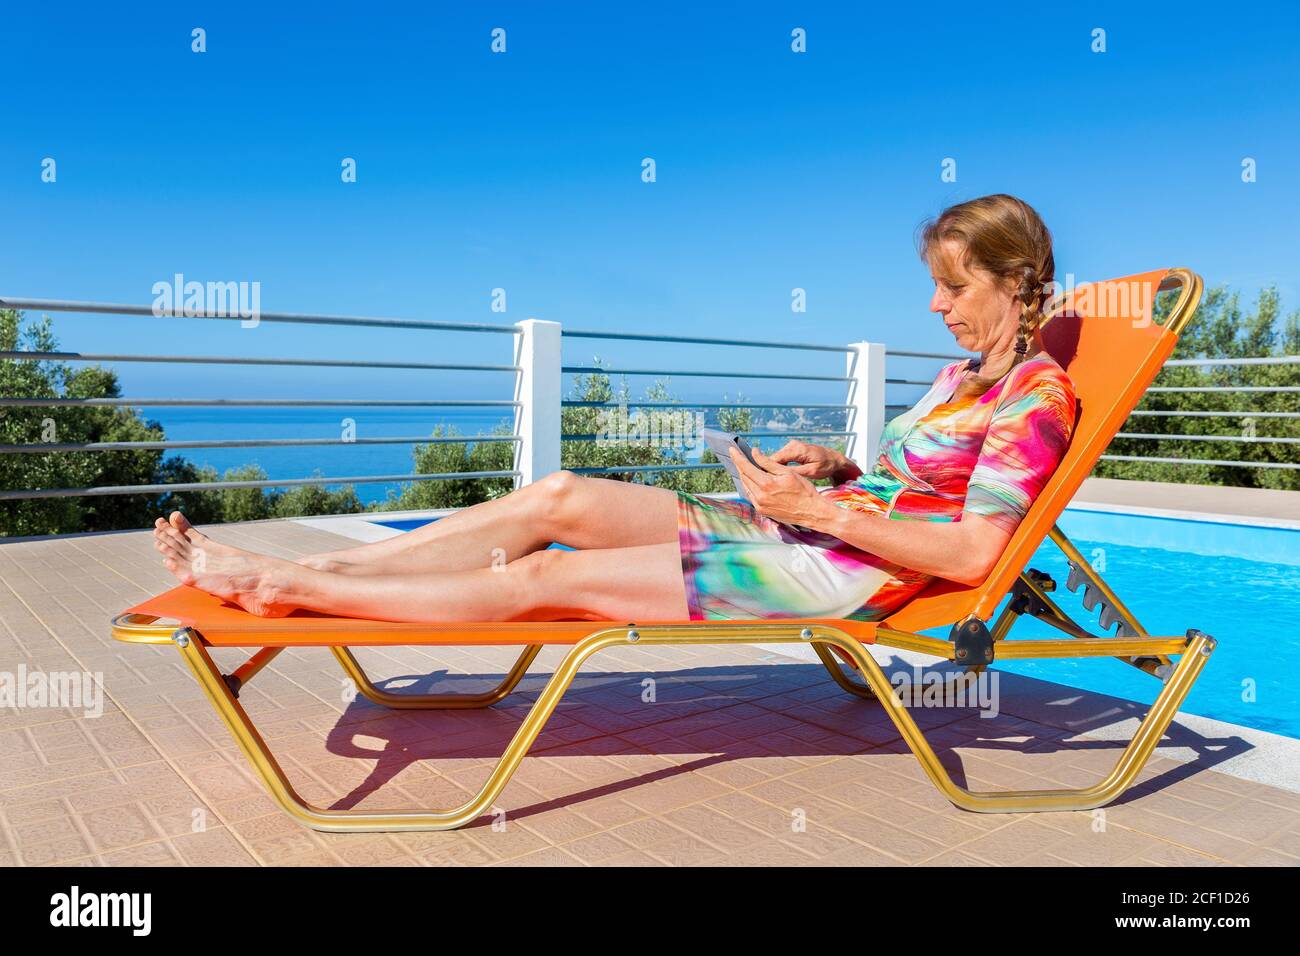 Middle aged dutch  woman lying on orange sunlounger reading tablet near pool Stock Photo